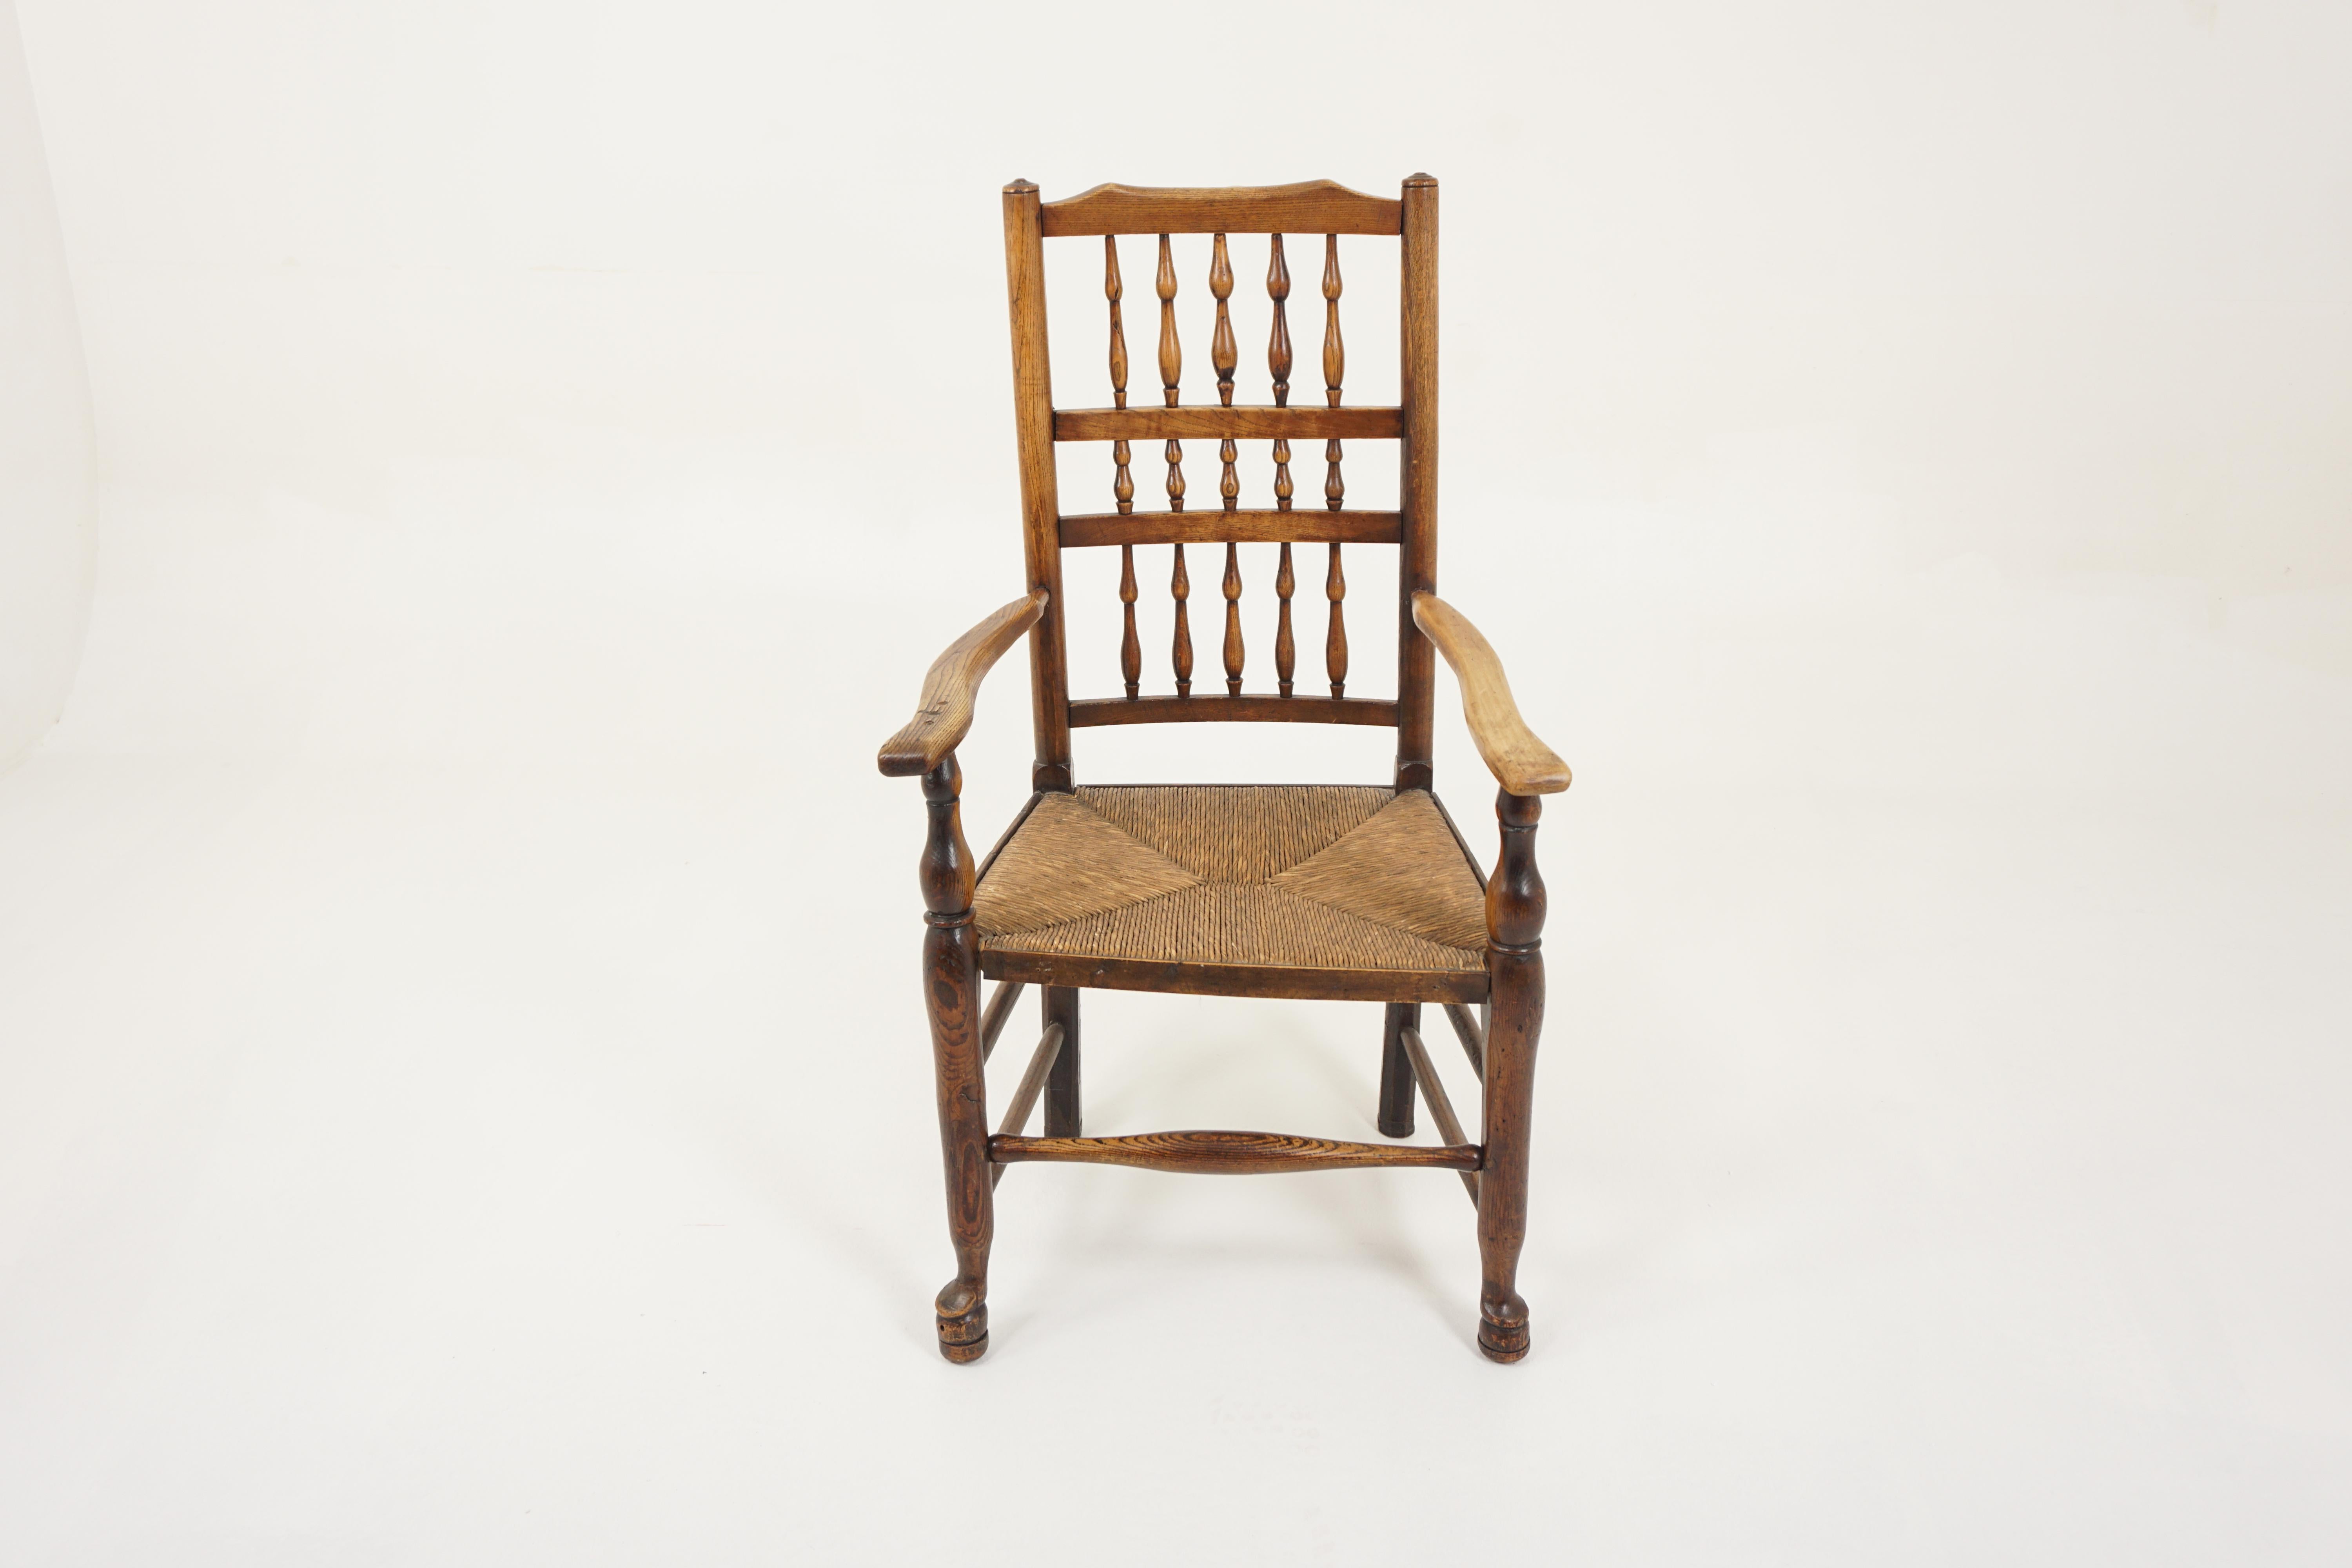 Antique Rush Seated Elm Lancashire Spindle Back Arm Chair, England 1900, H942

England 1900
Solid Elm
Original finish
Turned spindle back
Open shaped arms
Woven rush seat
On turned legs with thick shaped stretchers below
Standing on pad